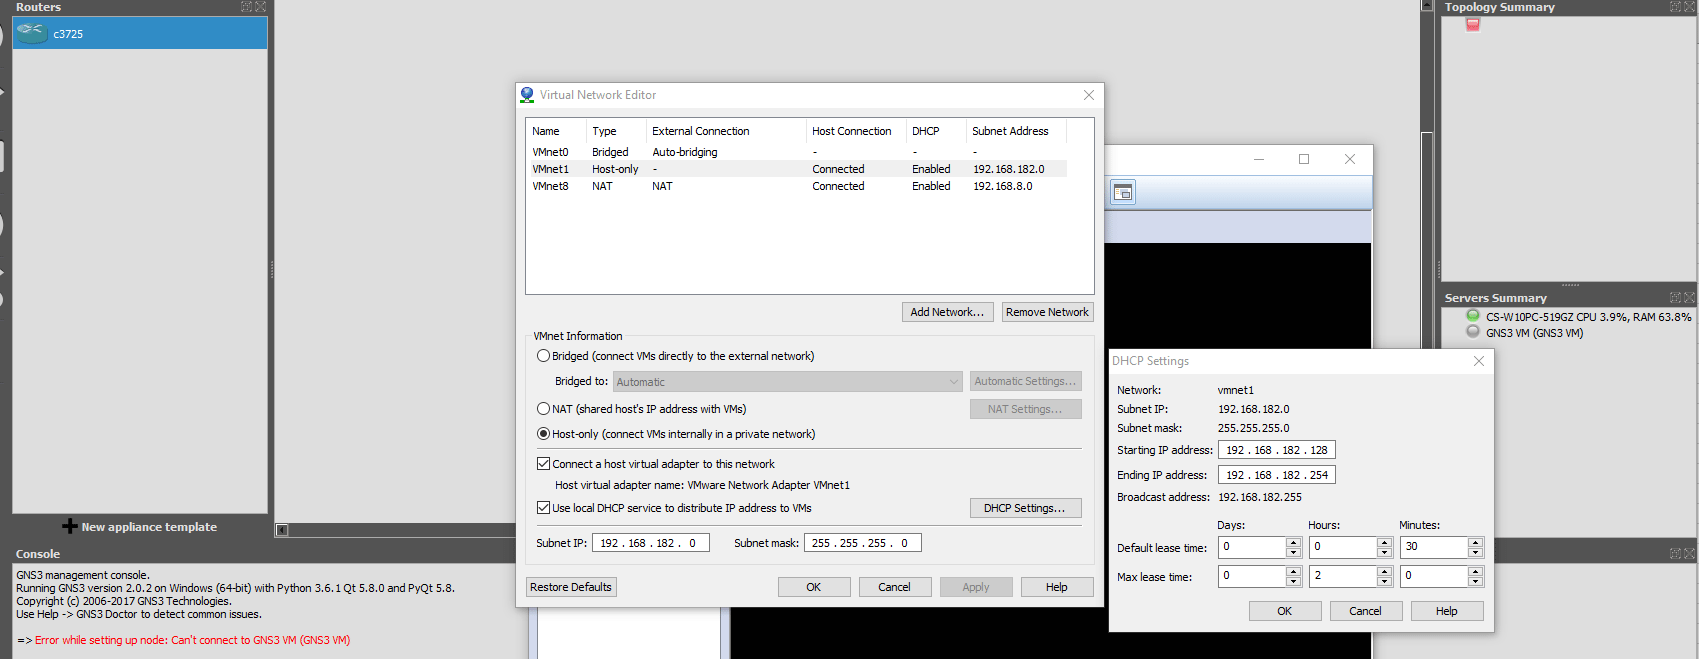 Update network workstations with new files.